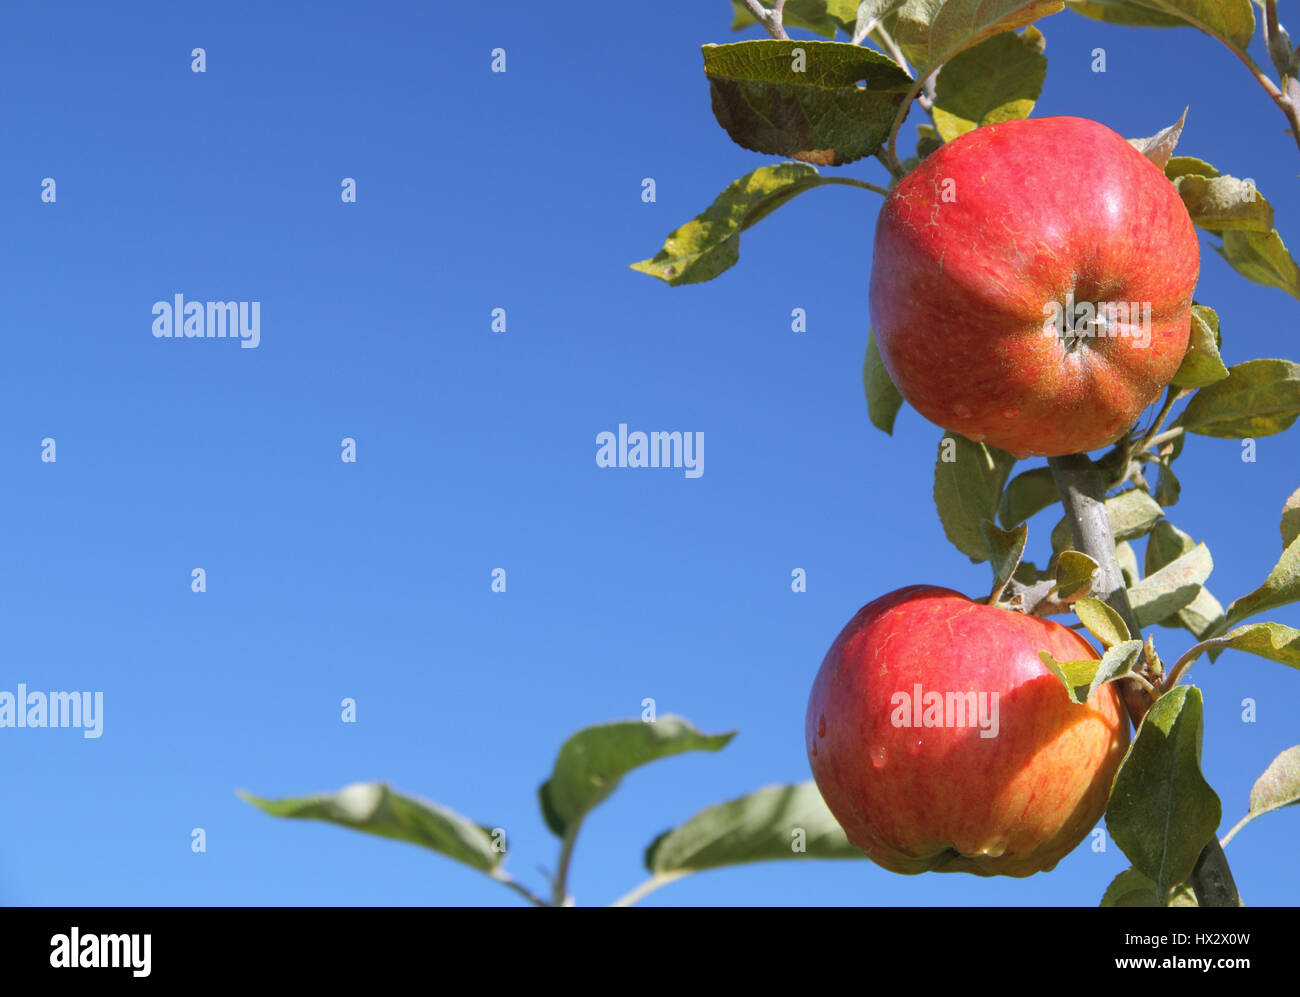 Dew drenched ripe heritage variety apples hang from a tree bough in an English orchard on a sunny October day, UK Stock Photo